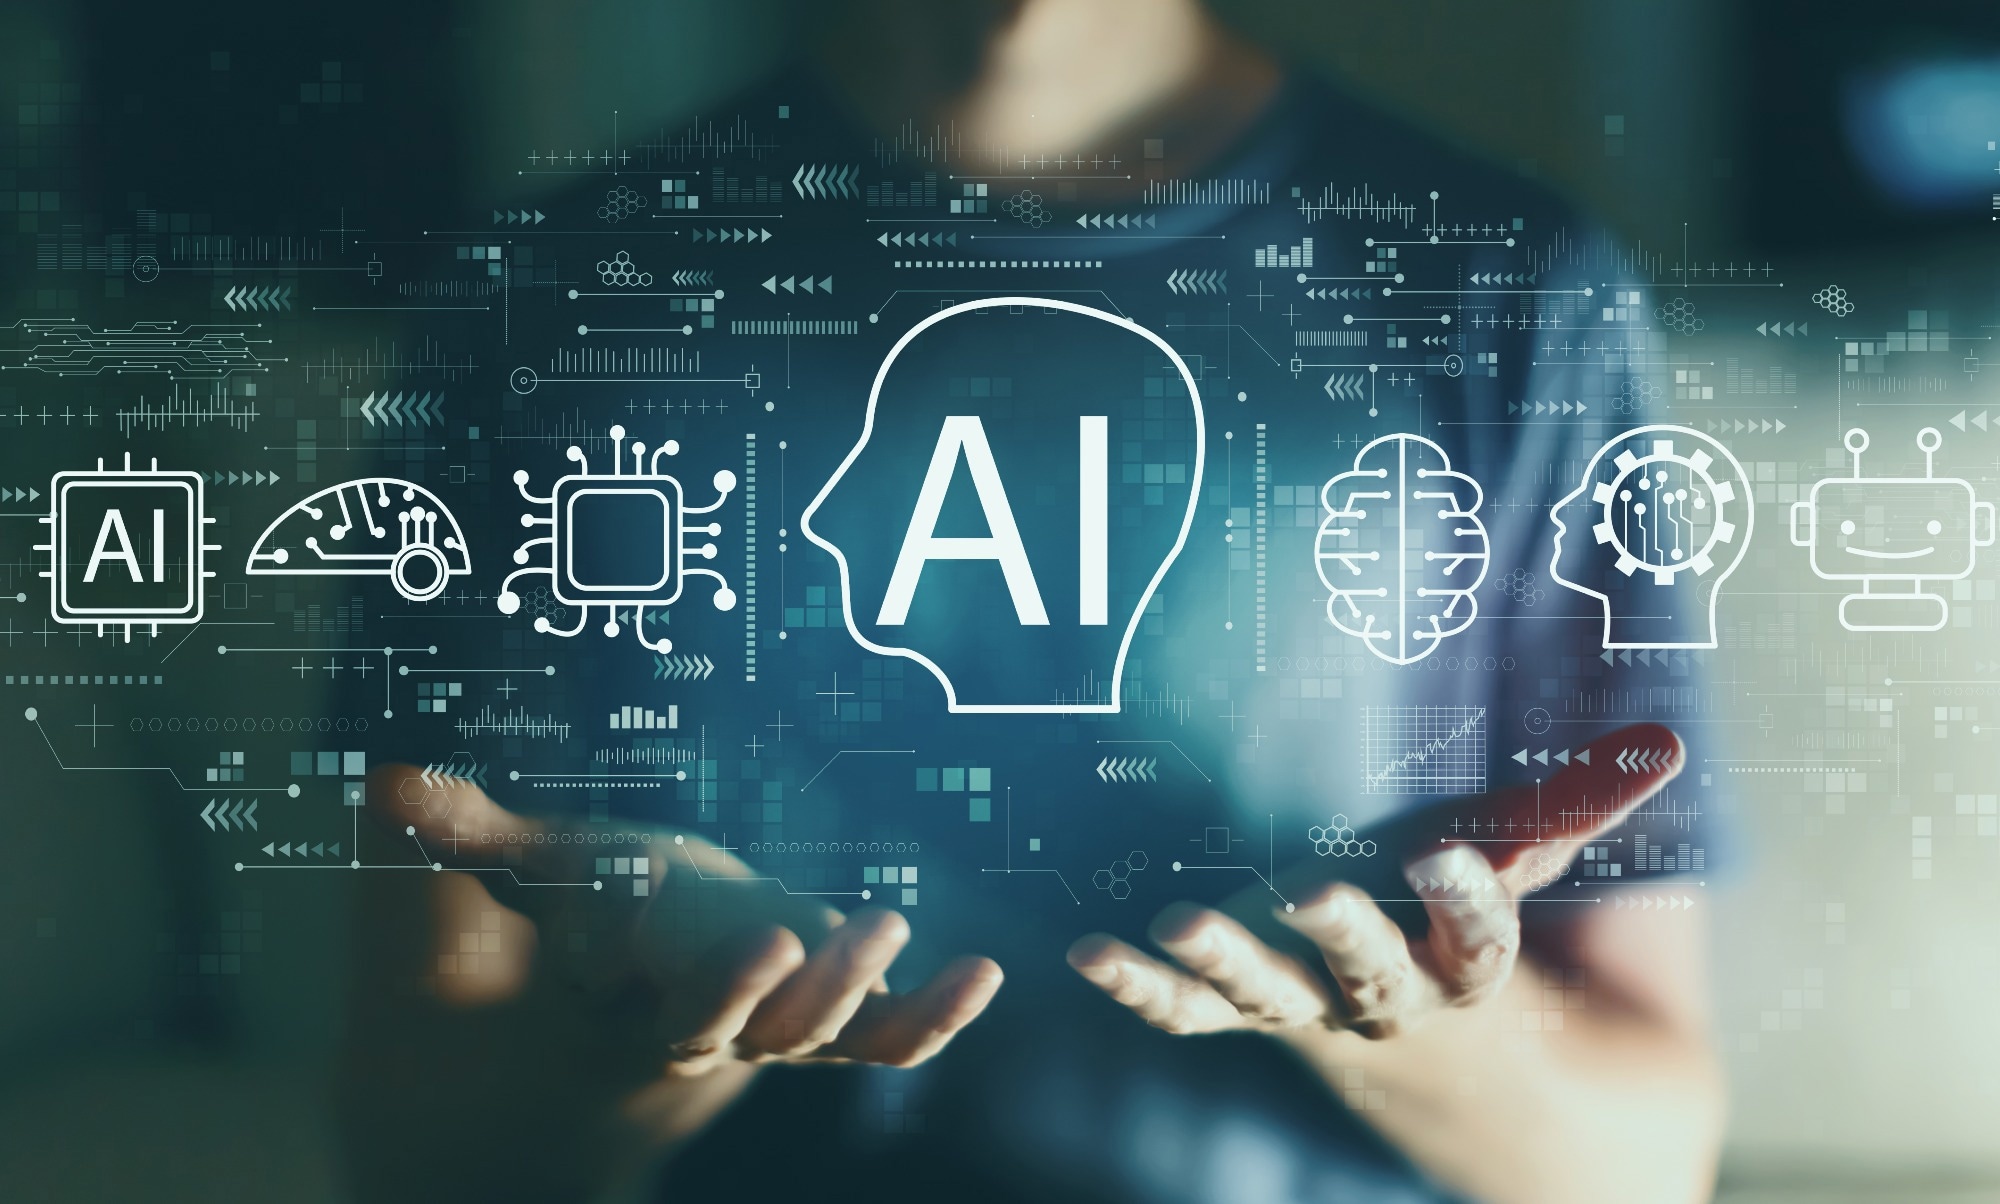 Study: Comparing Physician and Artificial Intelligence Chatbot Responses to Patient Questions Posted to a Public Social Media Forum. Image Credit: TierneyMJ / Shutterstock